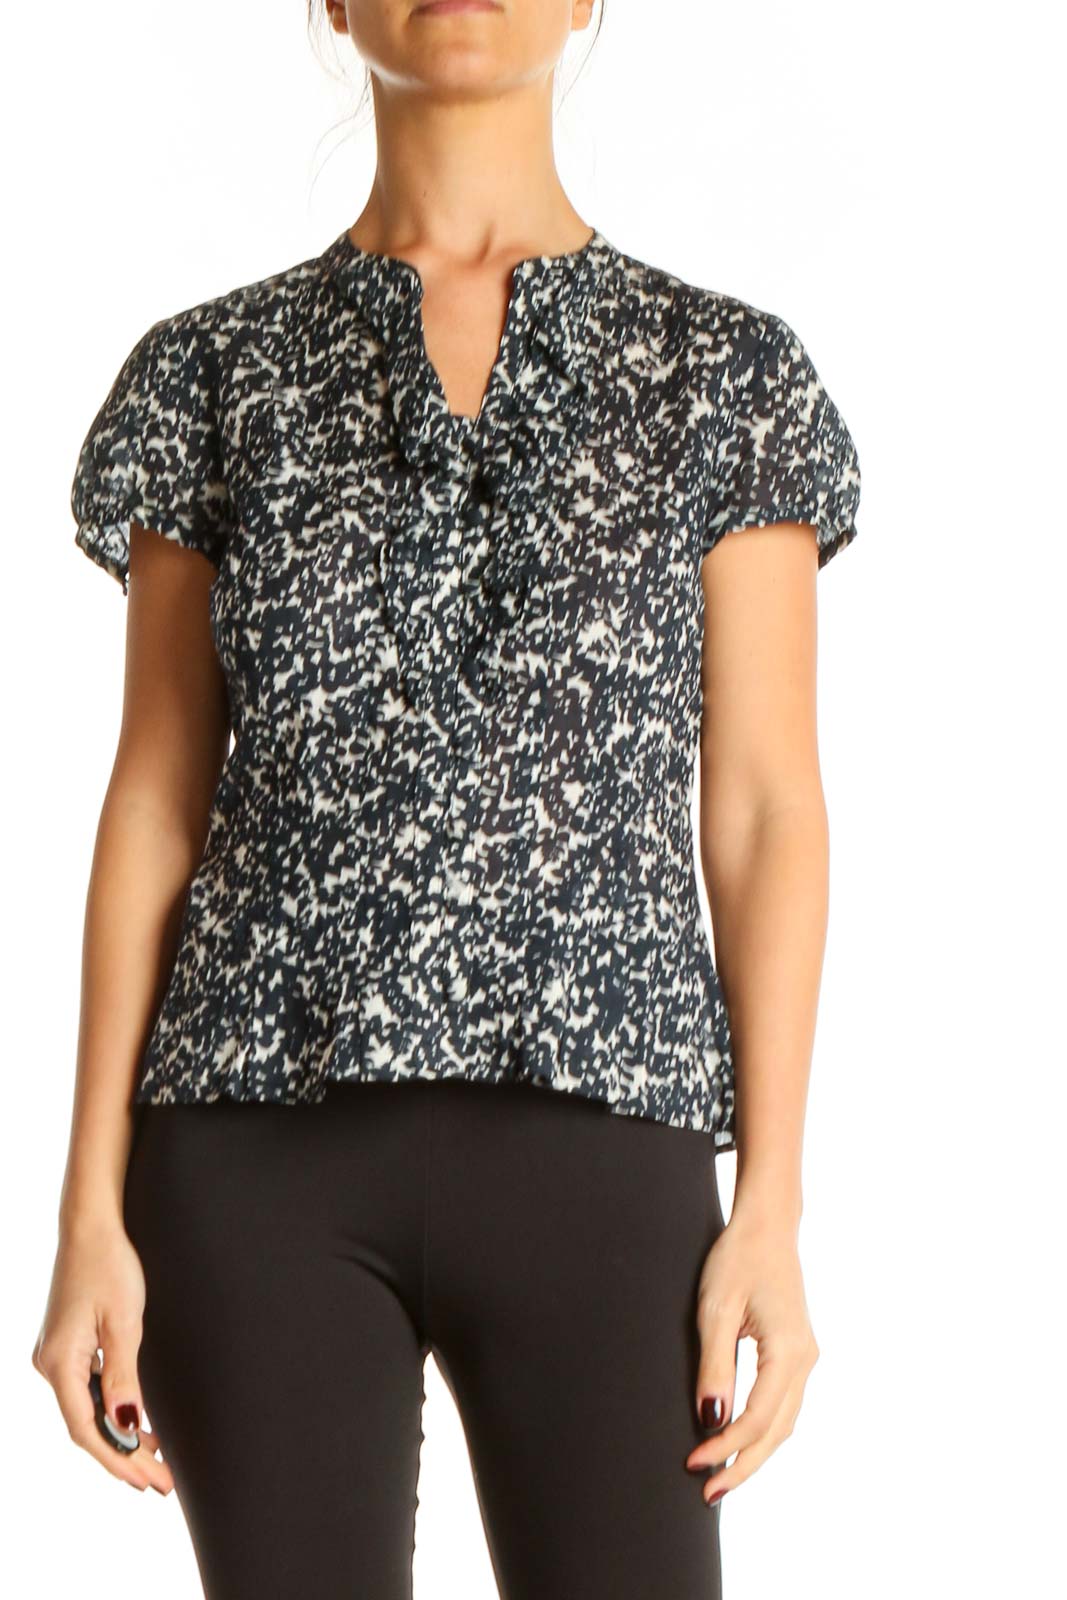 Black Printed Chic Top Front